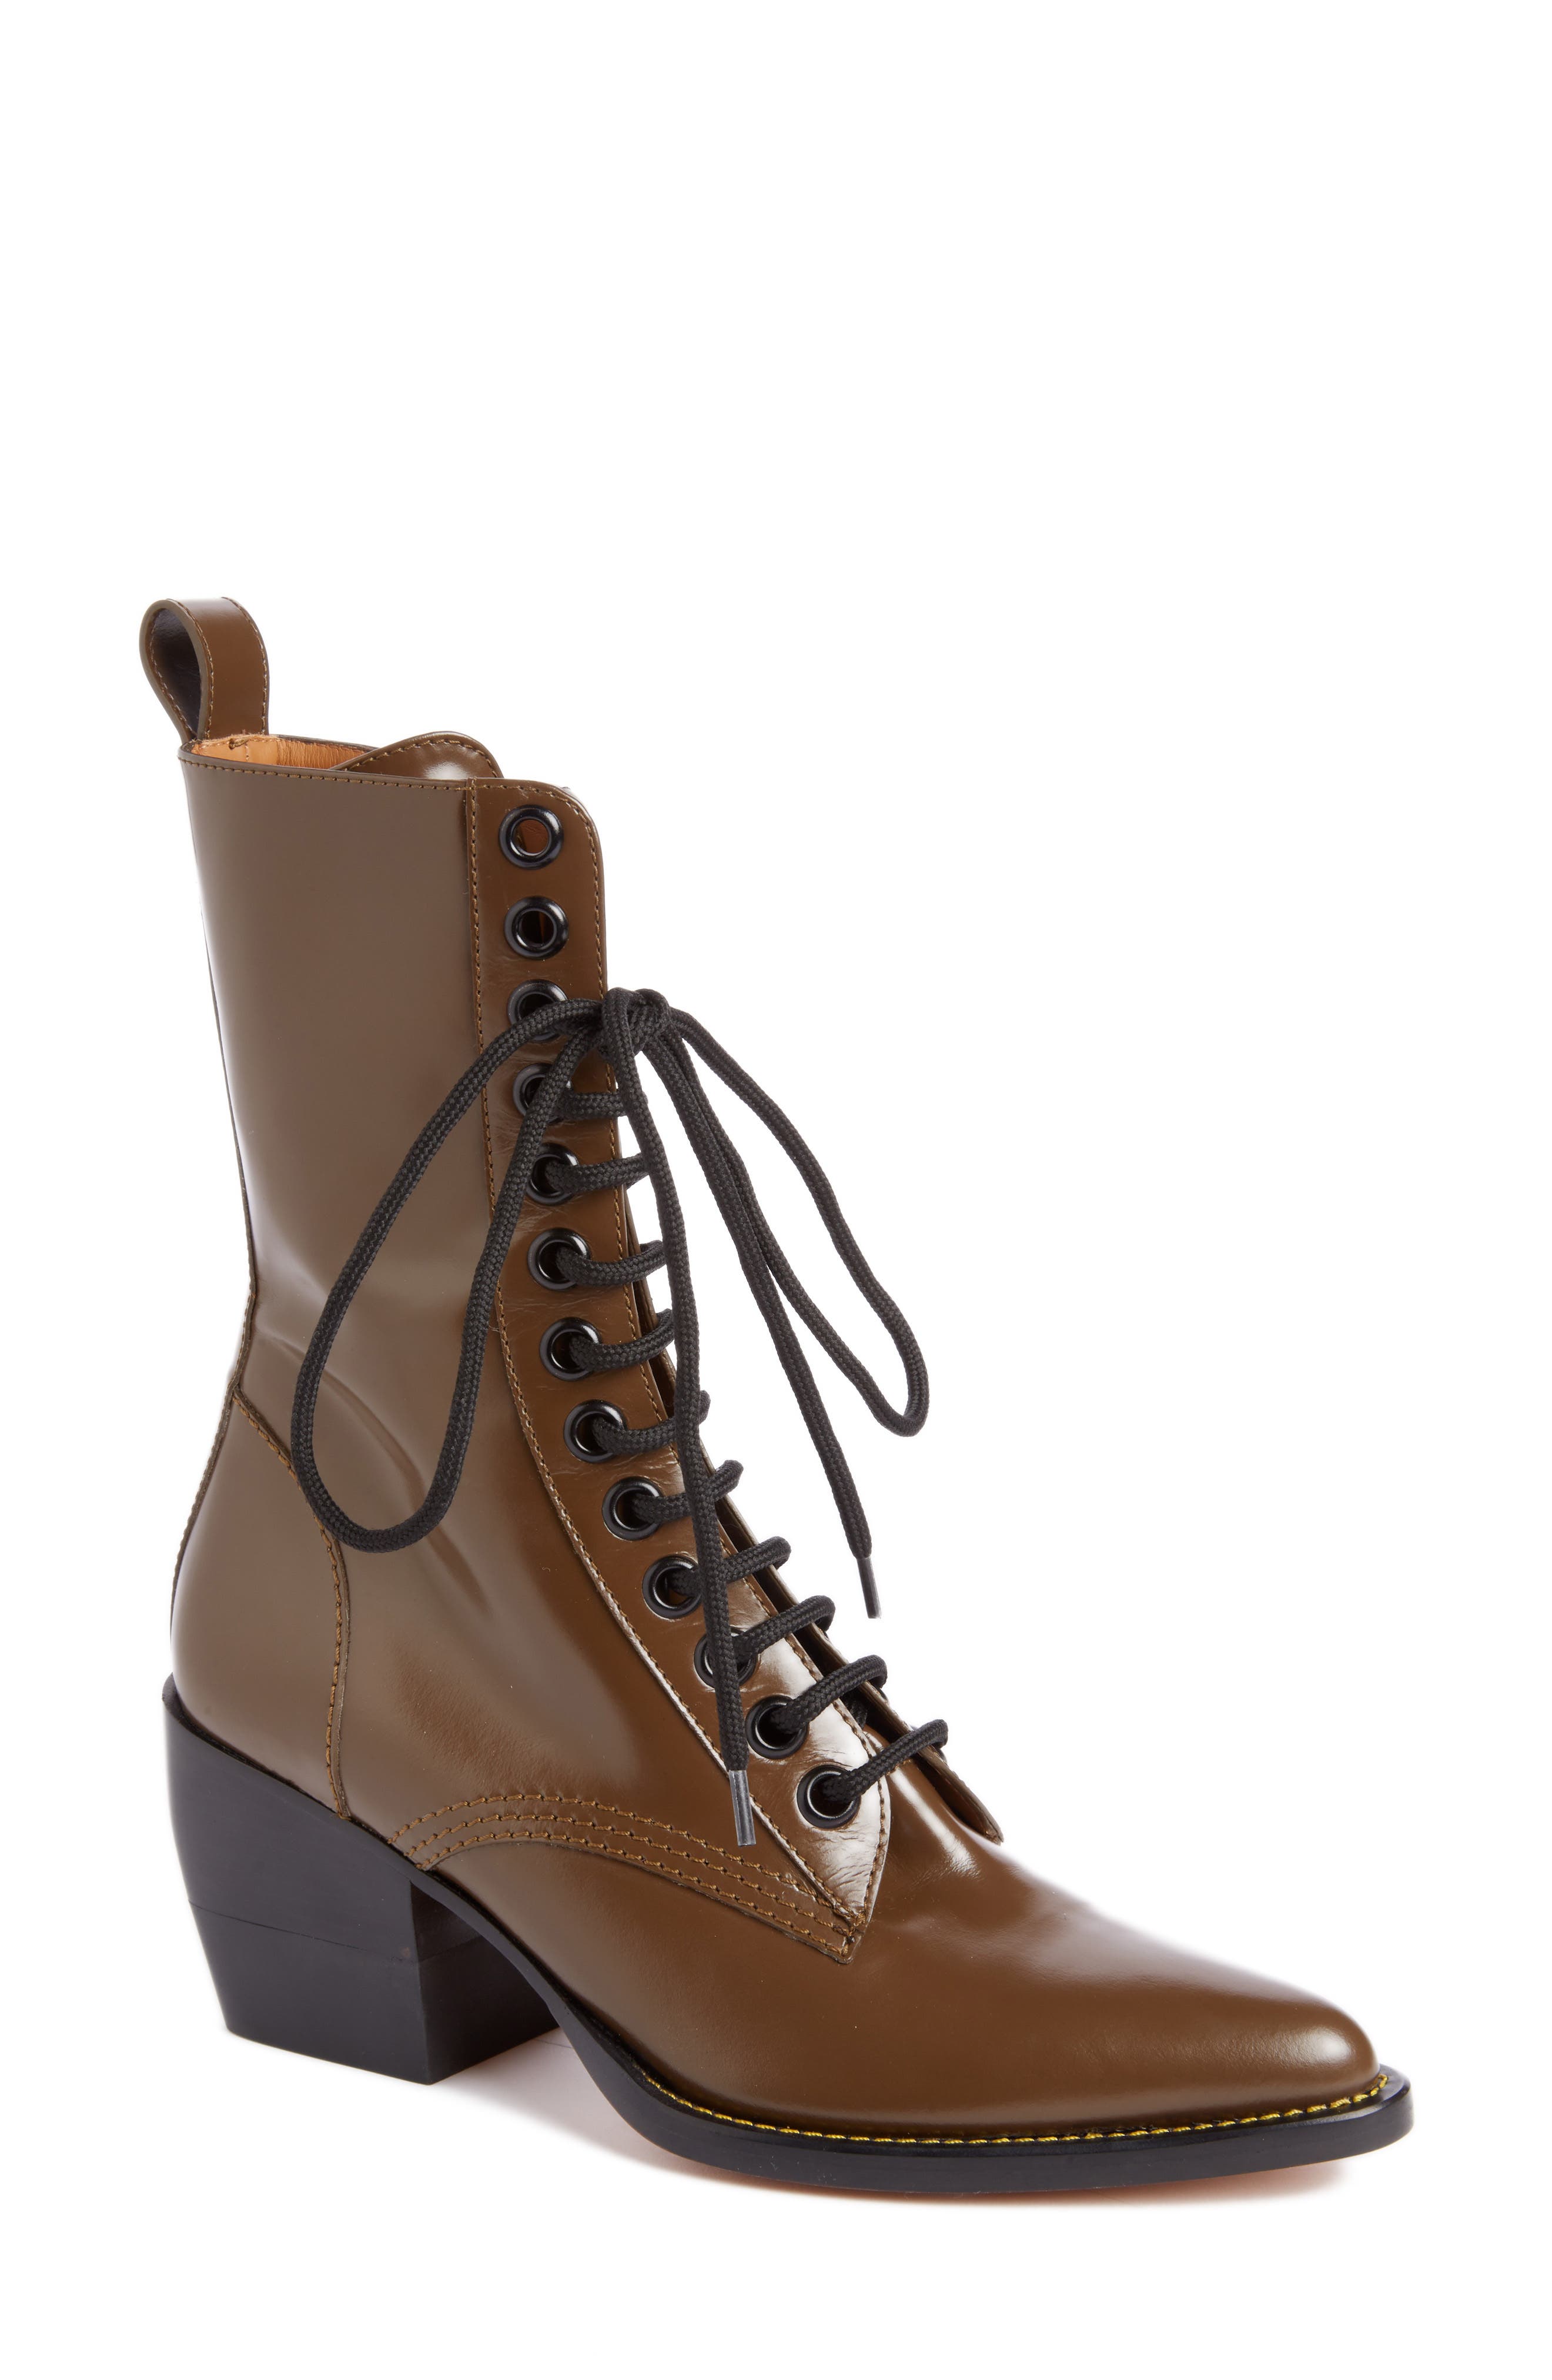 Chloé Rylee Lace-Up Boot | Nordstrom